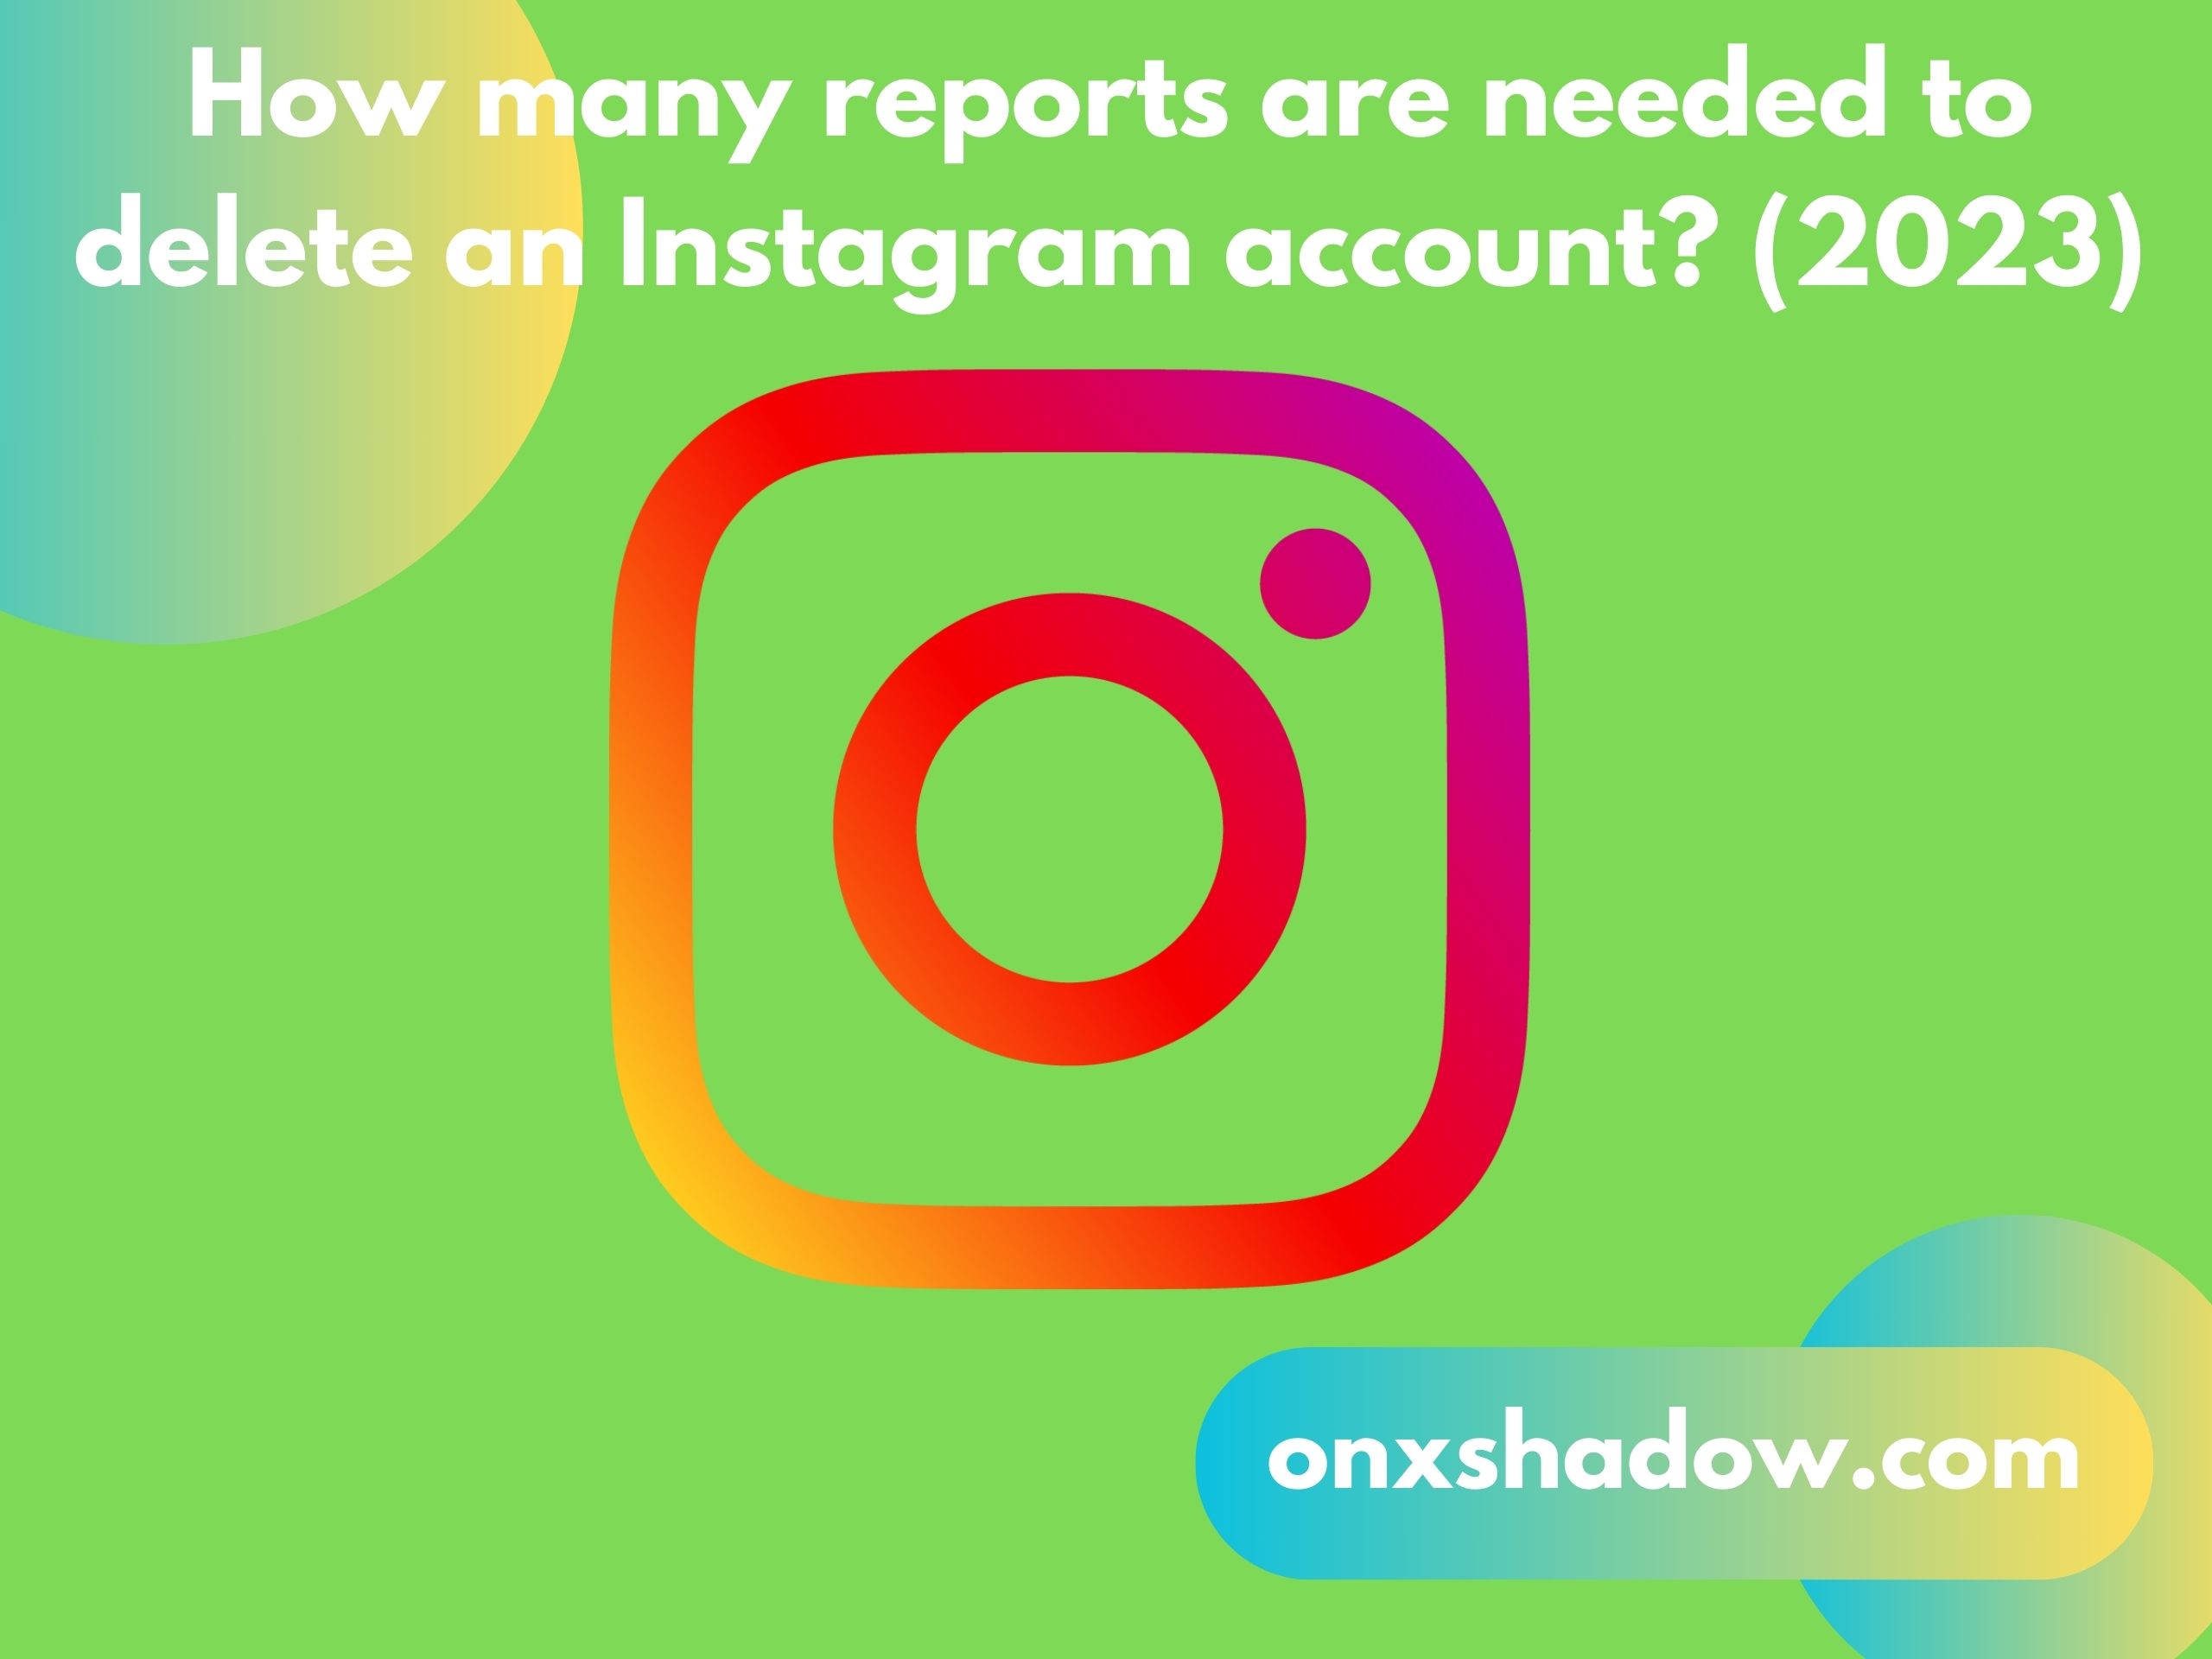 How many reports are needed to delete an Instagram account? (2023)